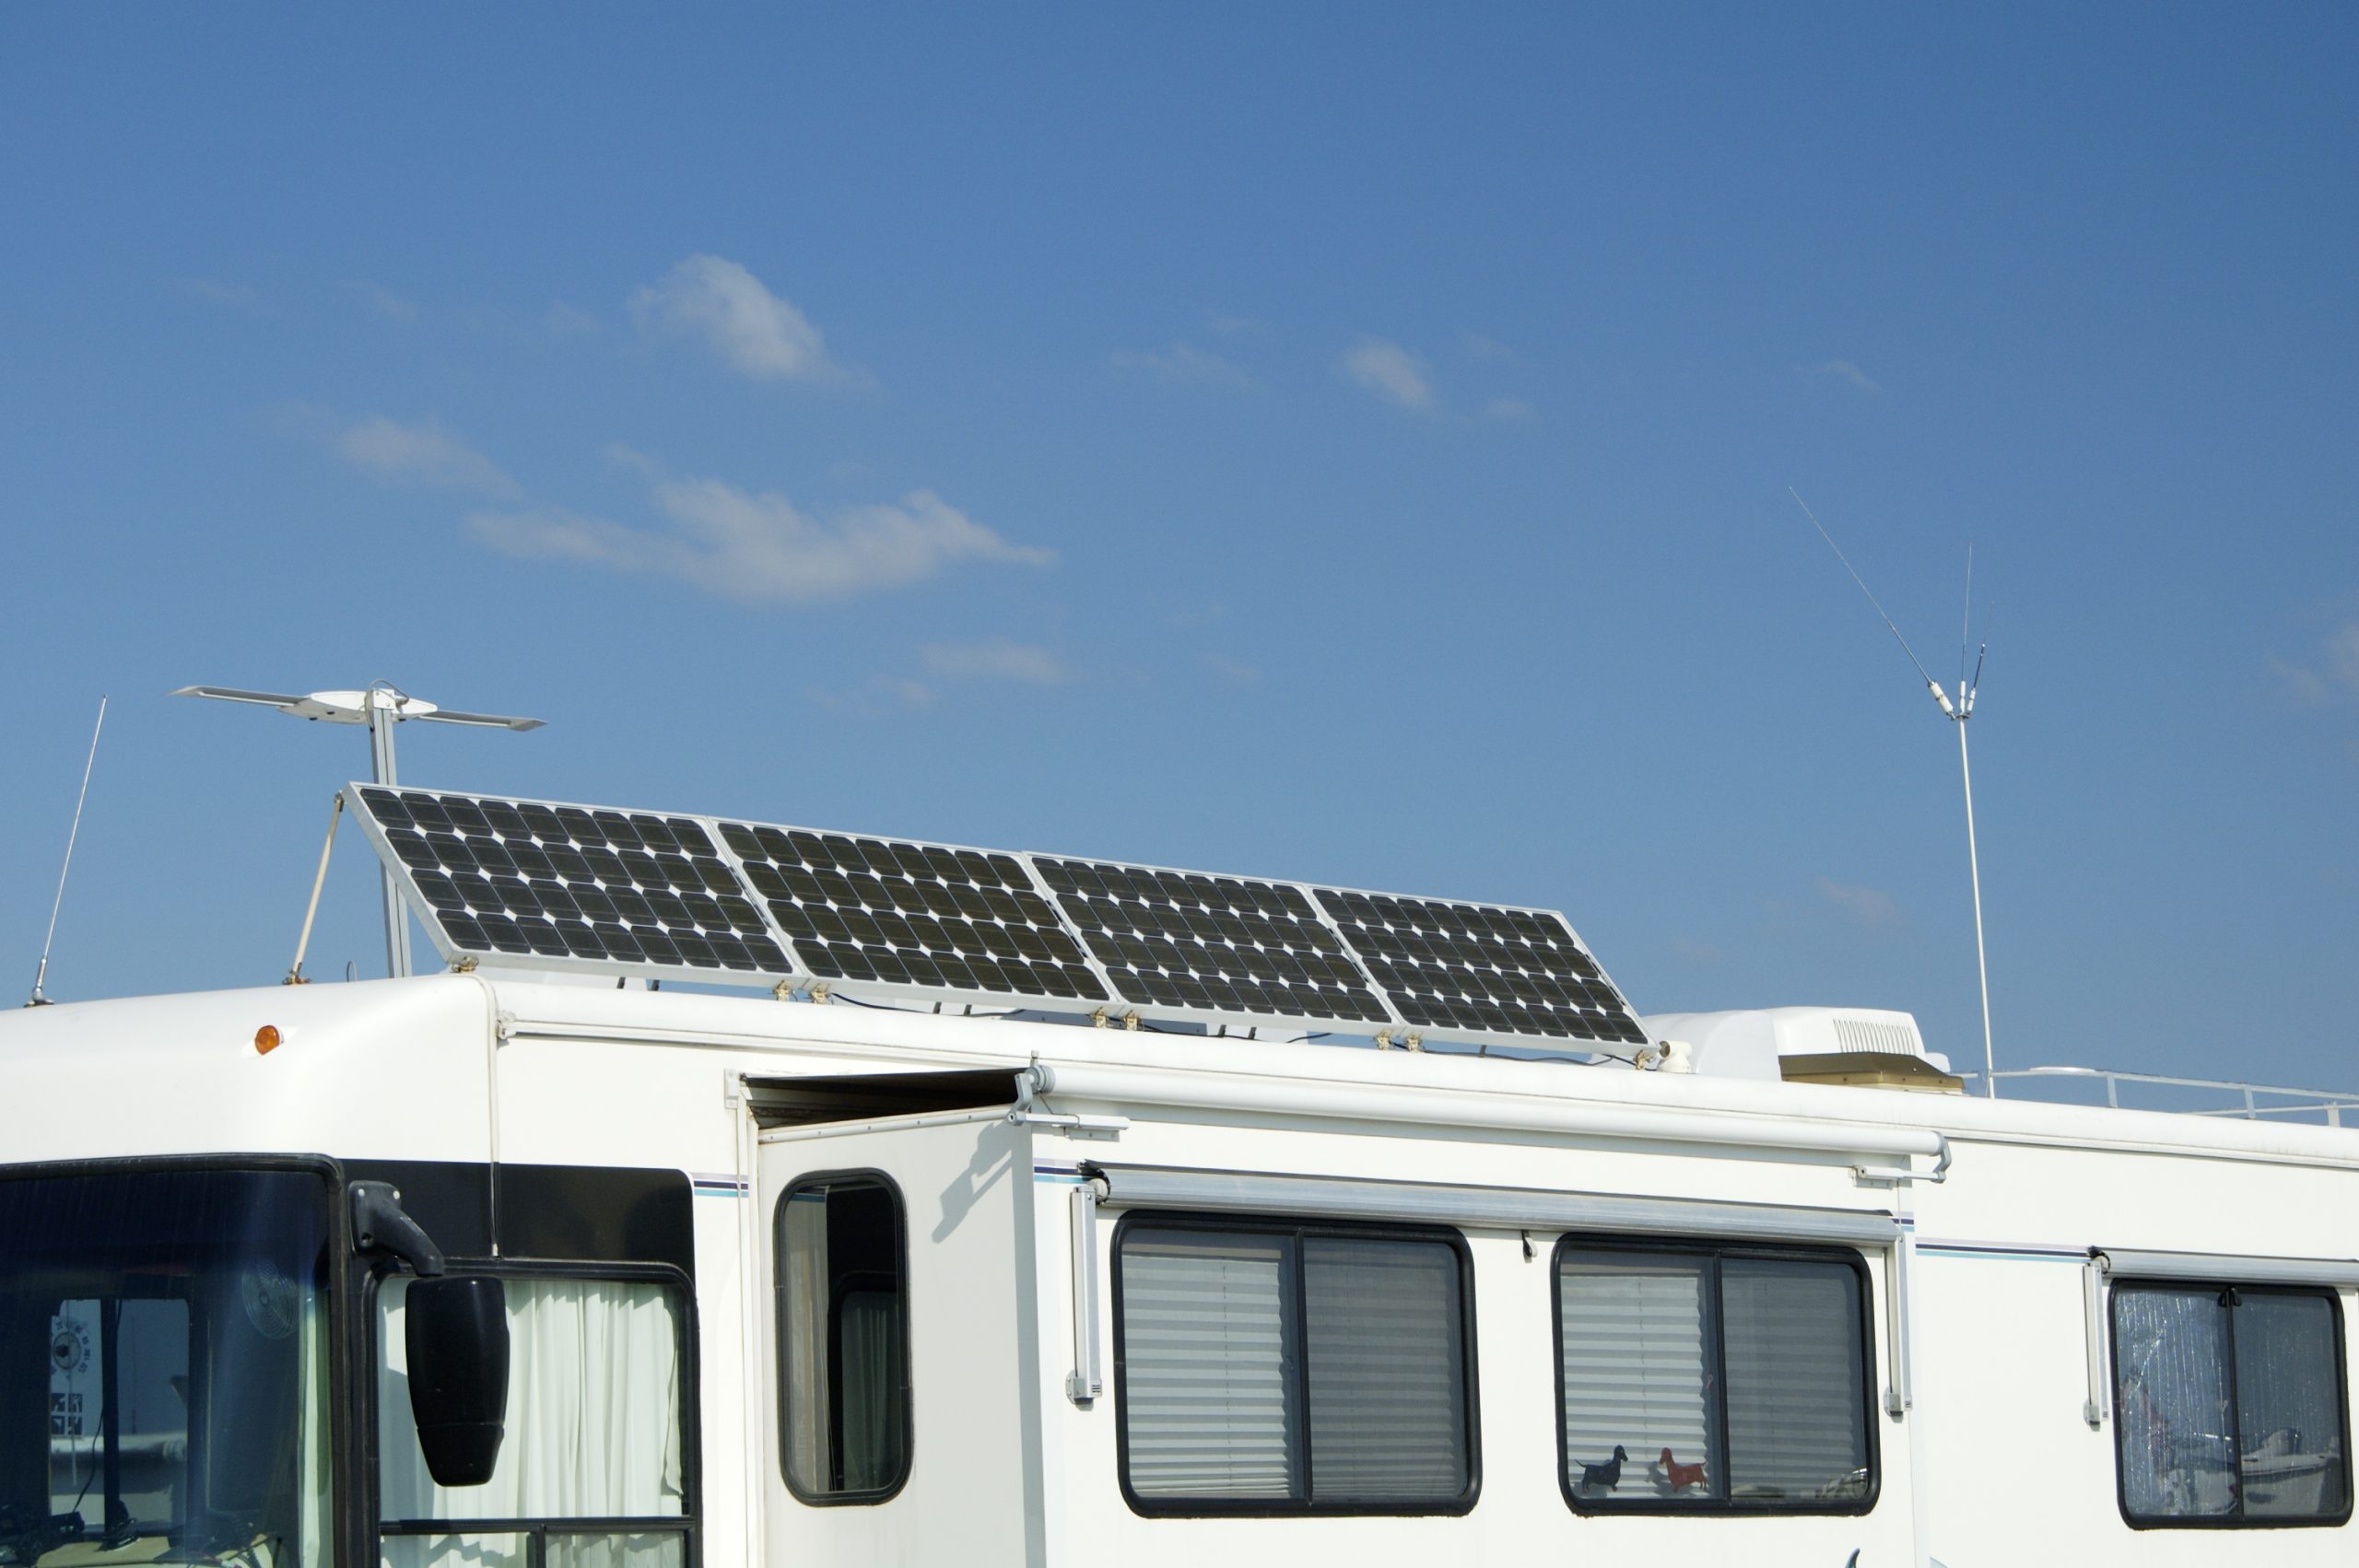 Camping with solar panels for converting energy from the sun to electricity.